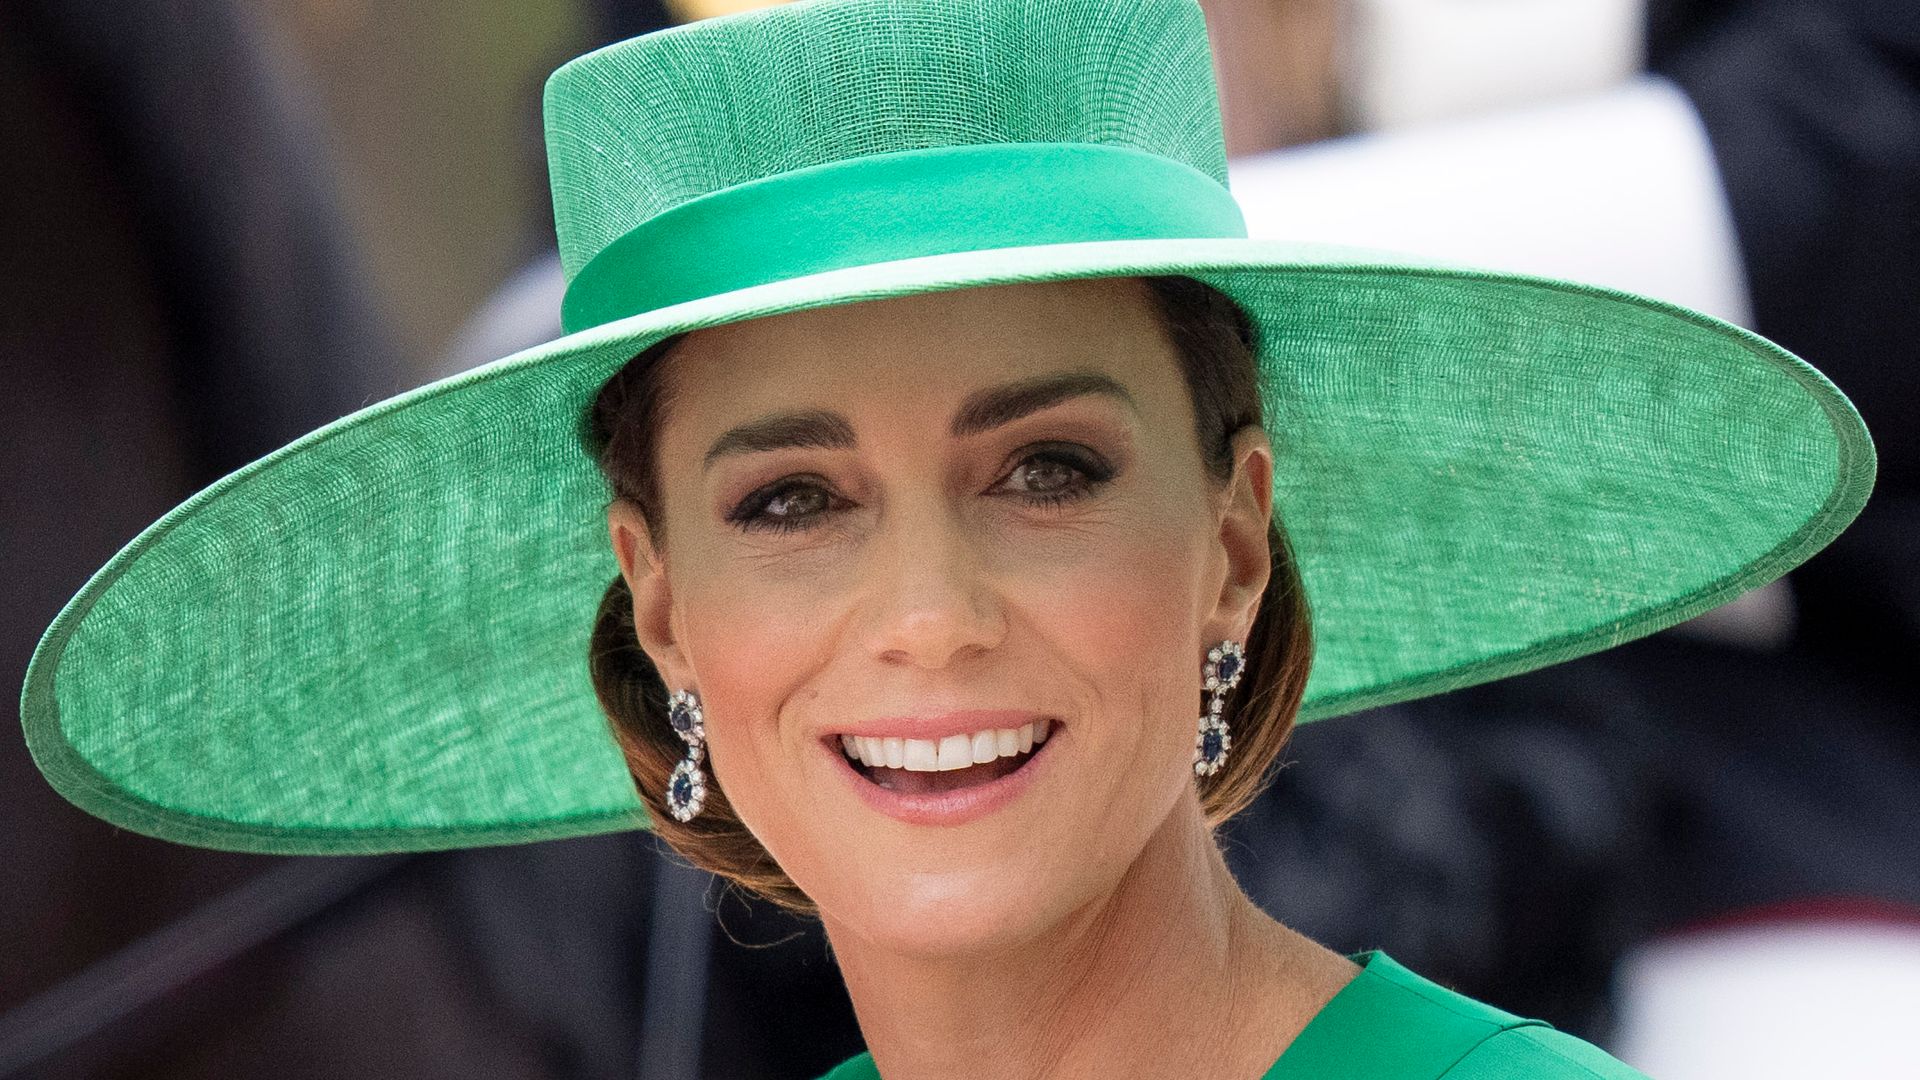 Princess Kate smiling at Trooping the Colour in her green coat dress